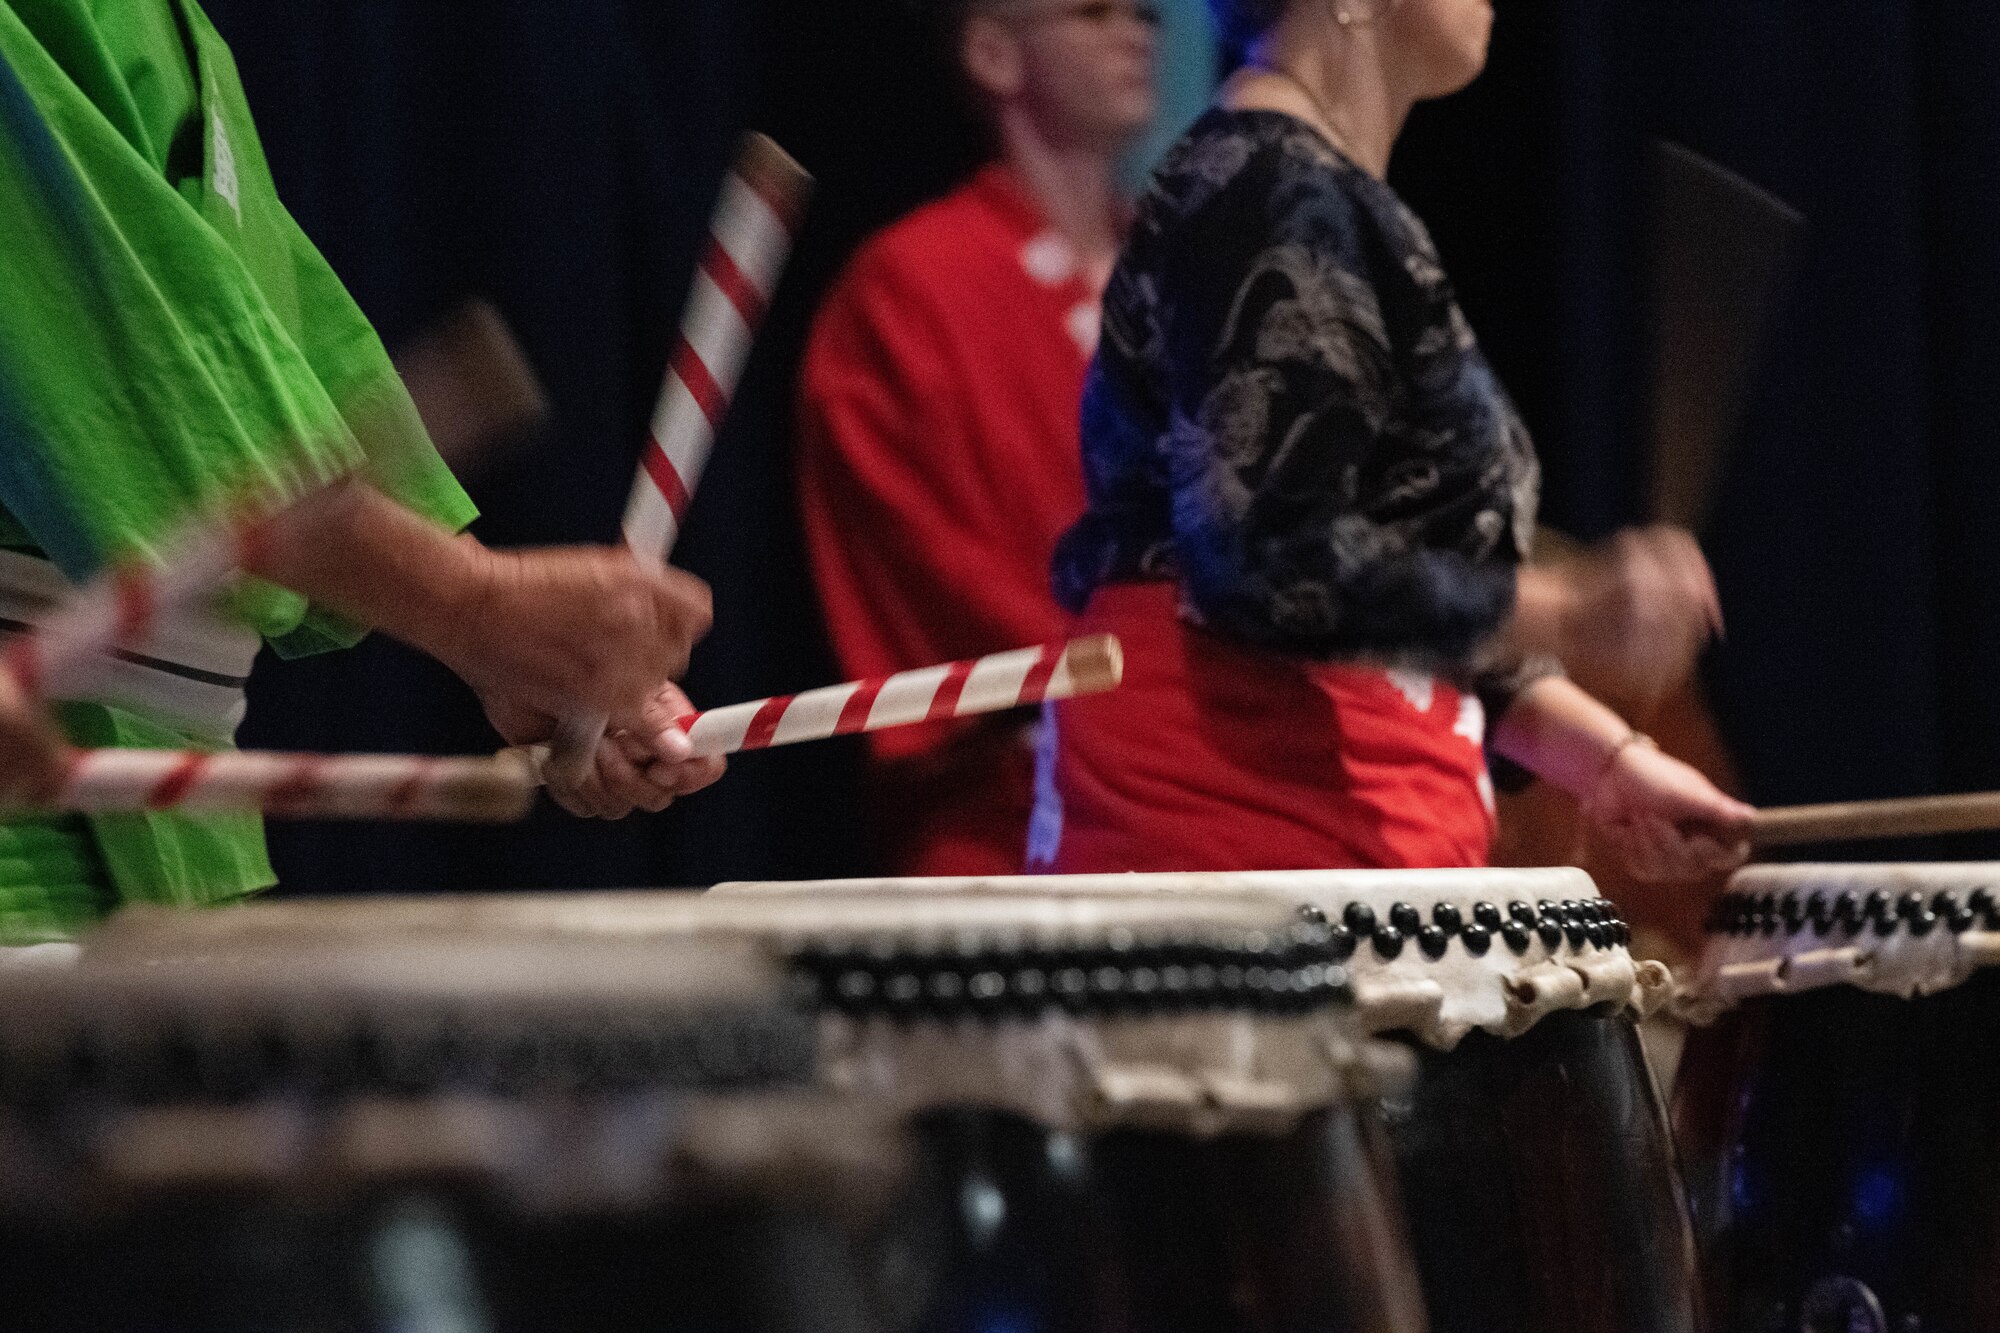 Bachi drumsticks beat against taiko drums